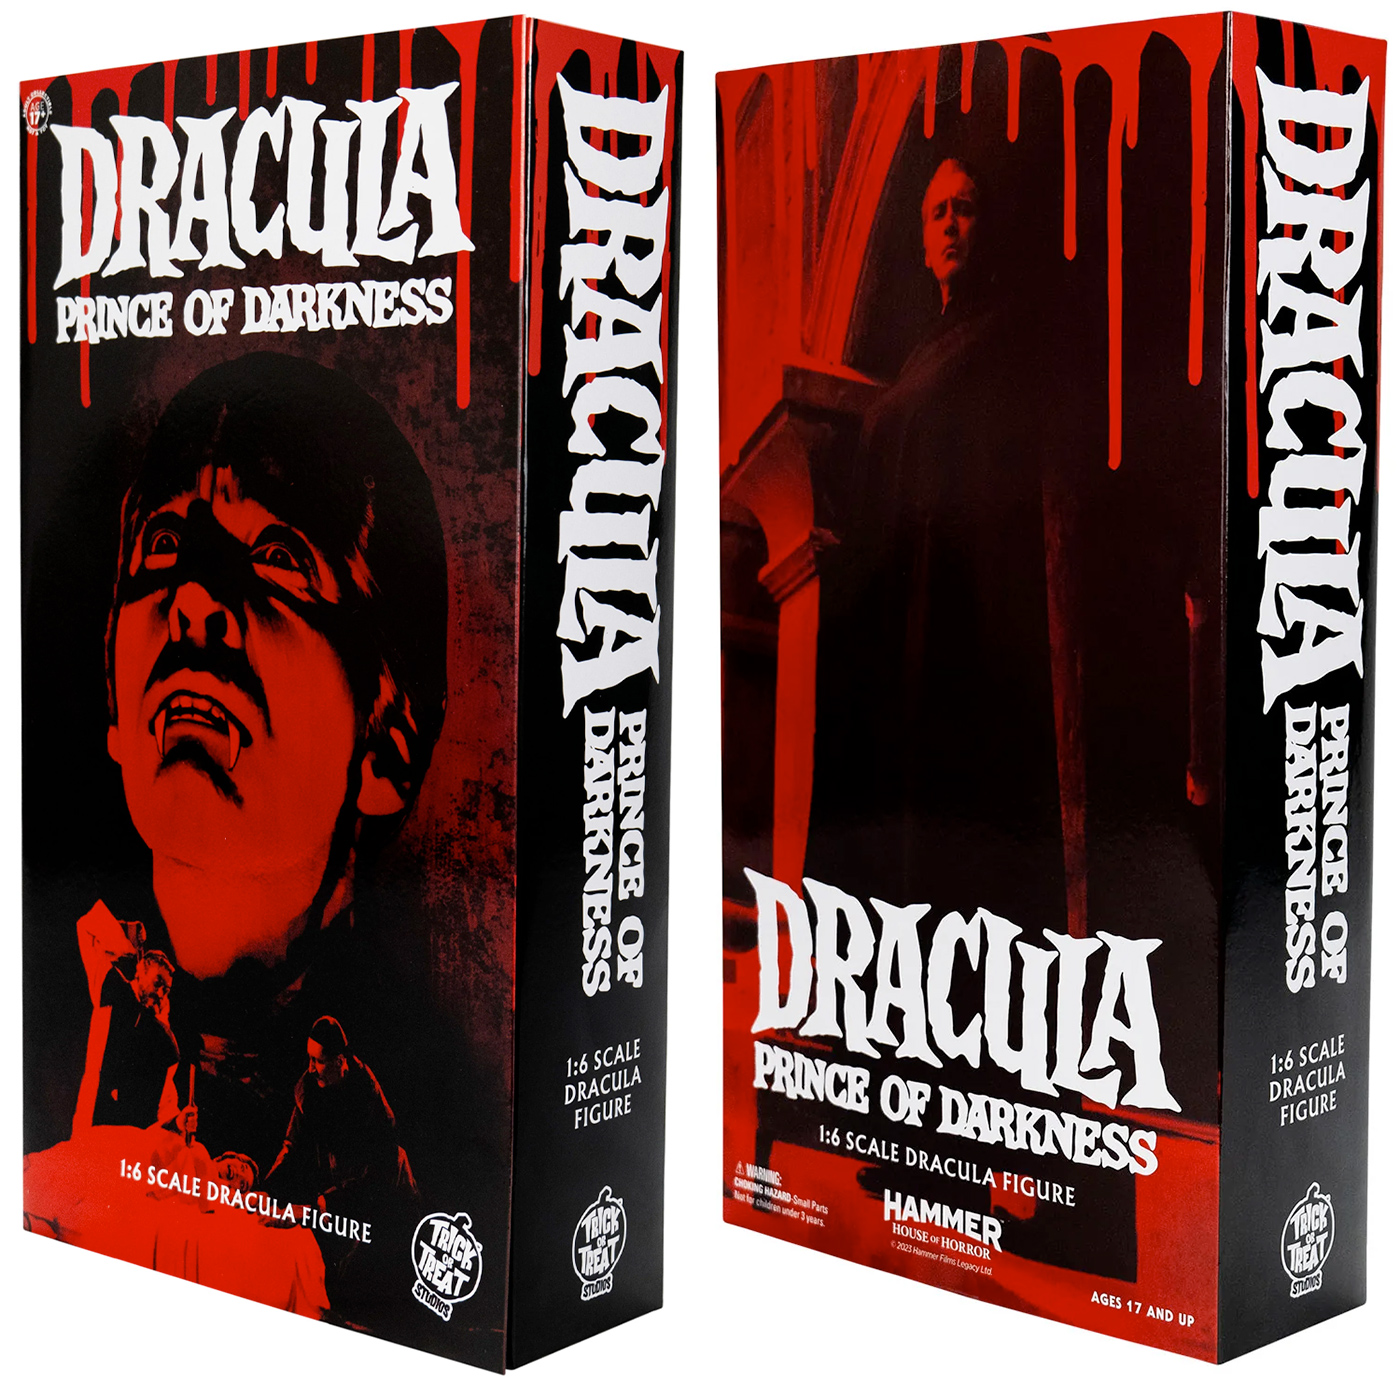 Action Figure Hammer Horror of Sir Christopher Lee as Dracula